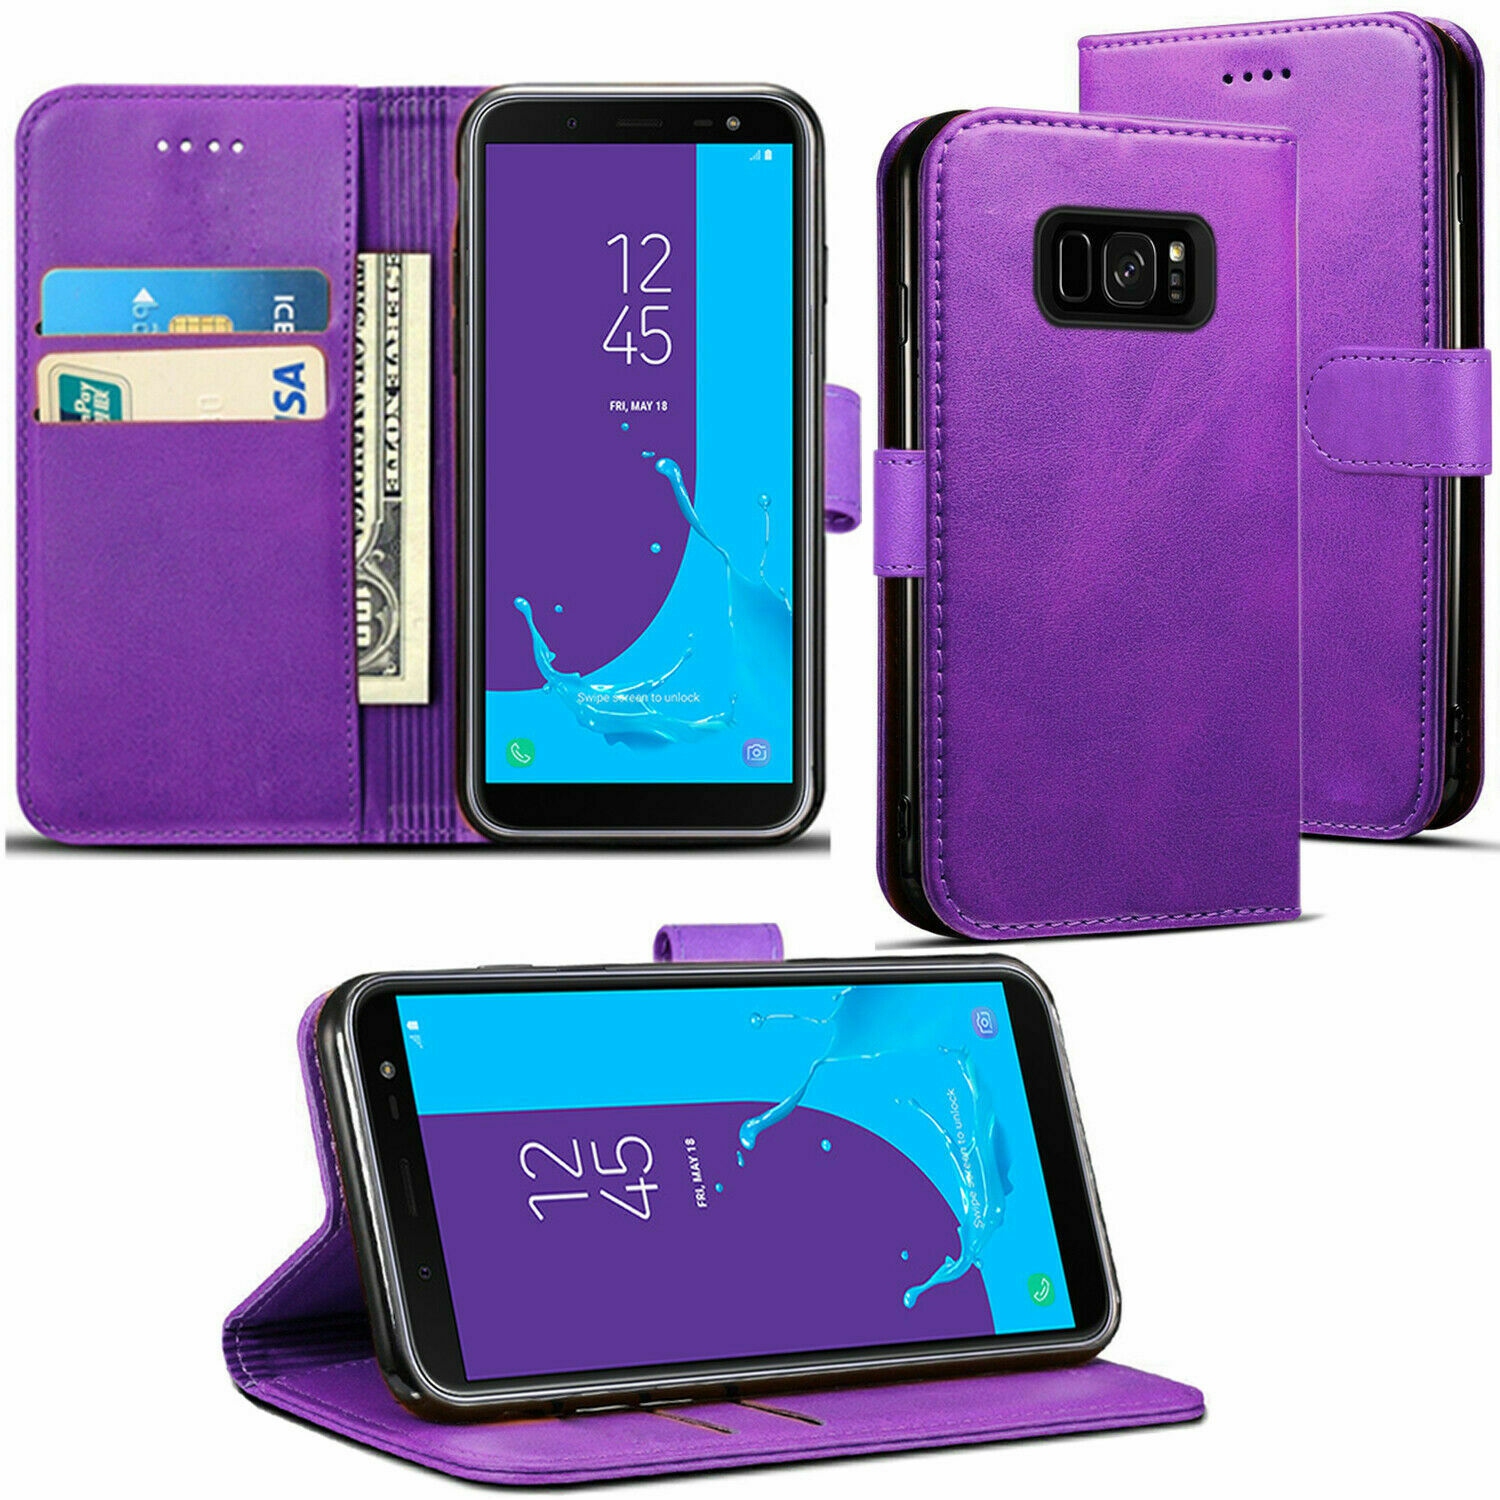 【CSmart】 Magnetic Card Slot Leather Folio Wallet Flip Case Cover for Samsung Galaxy S7 Edge, Purple